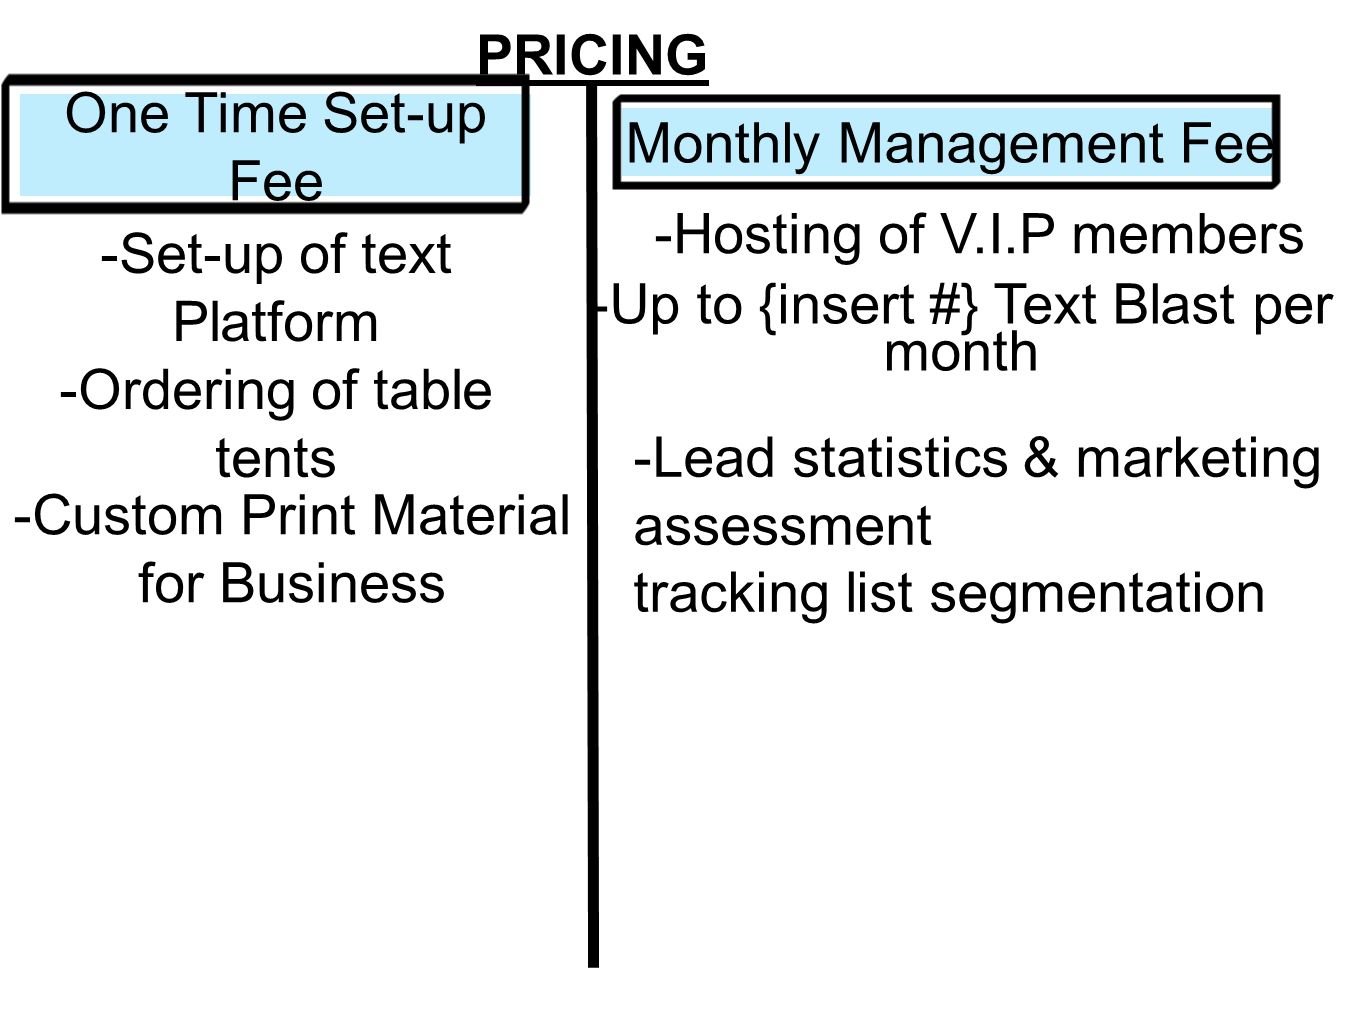 PRICING One Time Set-up Fee Monthly Management Fee -Ordering of table tents -Set-up of text Platform -Custom Print Material for Business -Hosting of V.I.P members -Up to {insert #} Text Blast per month -Lead statistics & marketing assessment tracking list segmentation